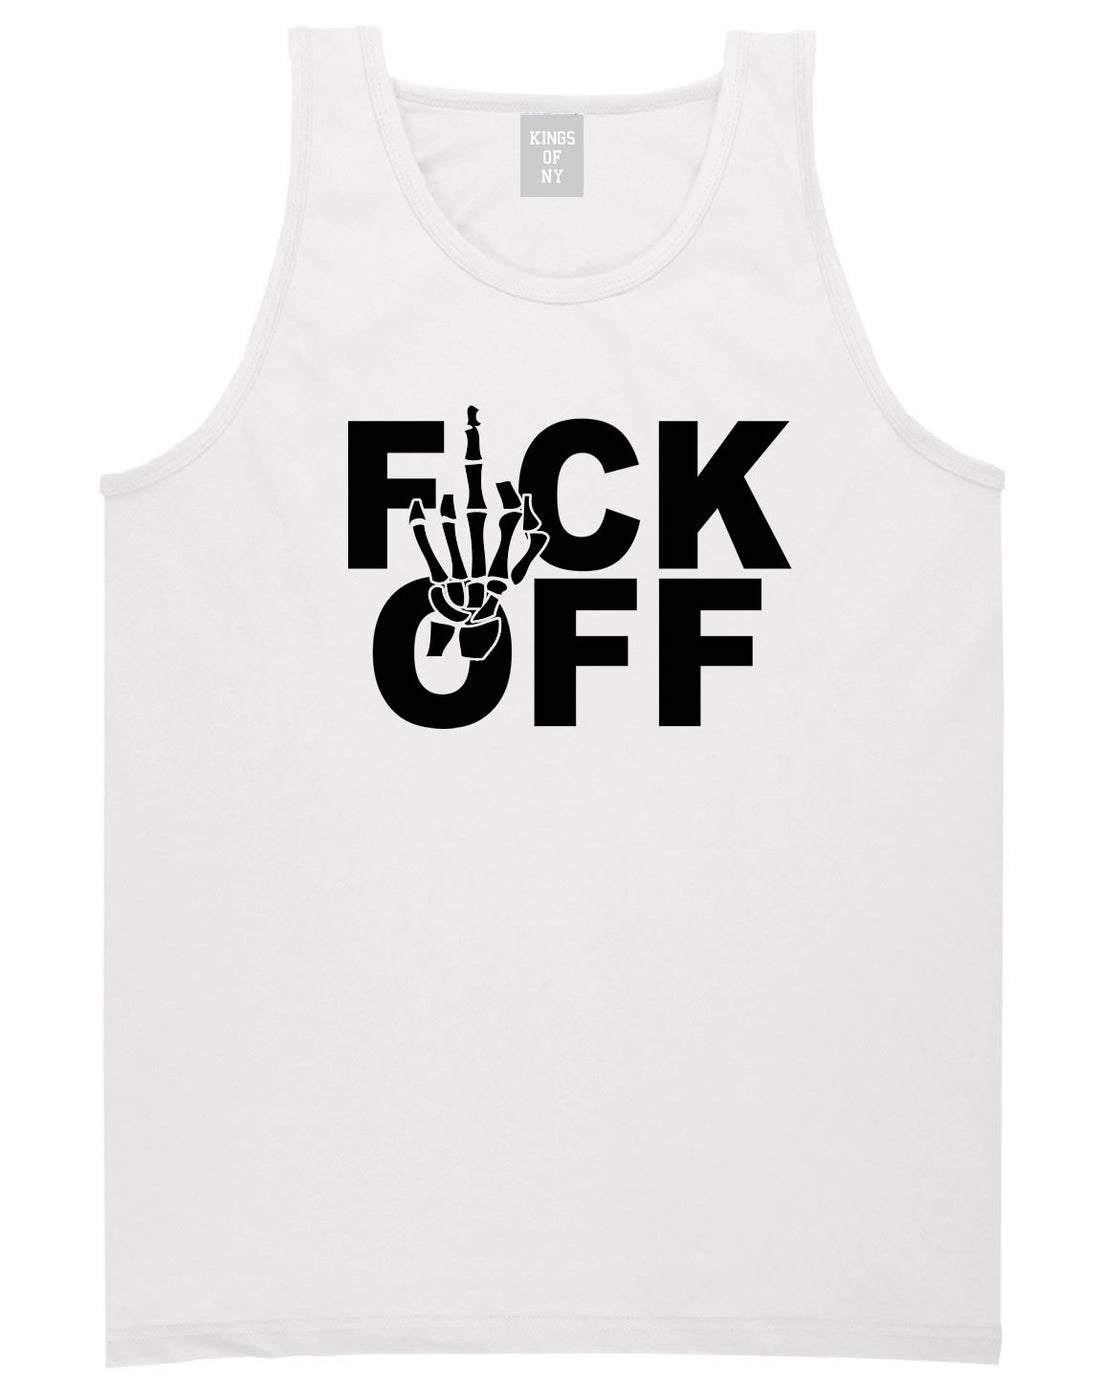 FCK OFF Skeleton Hand Tank Top in White by Kings Of NY